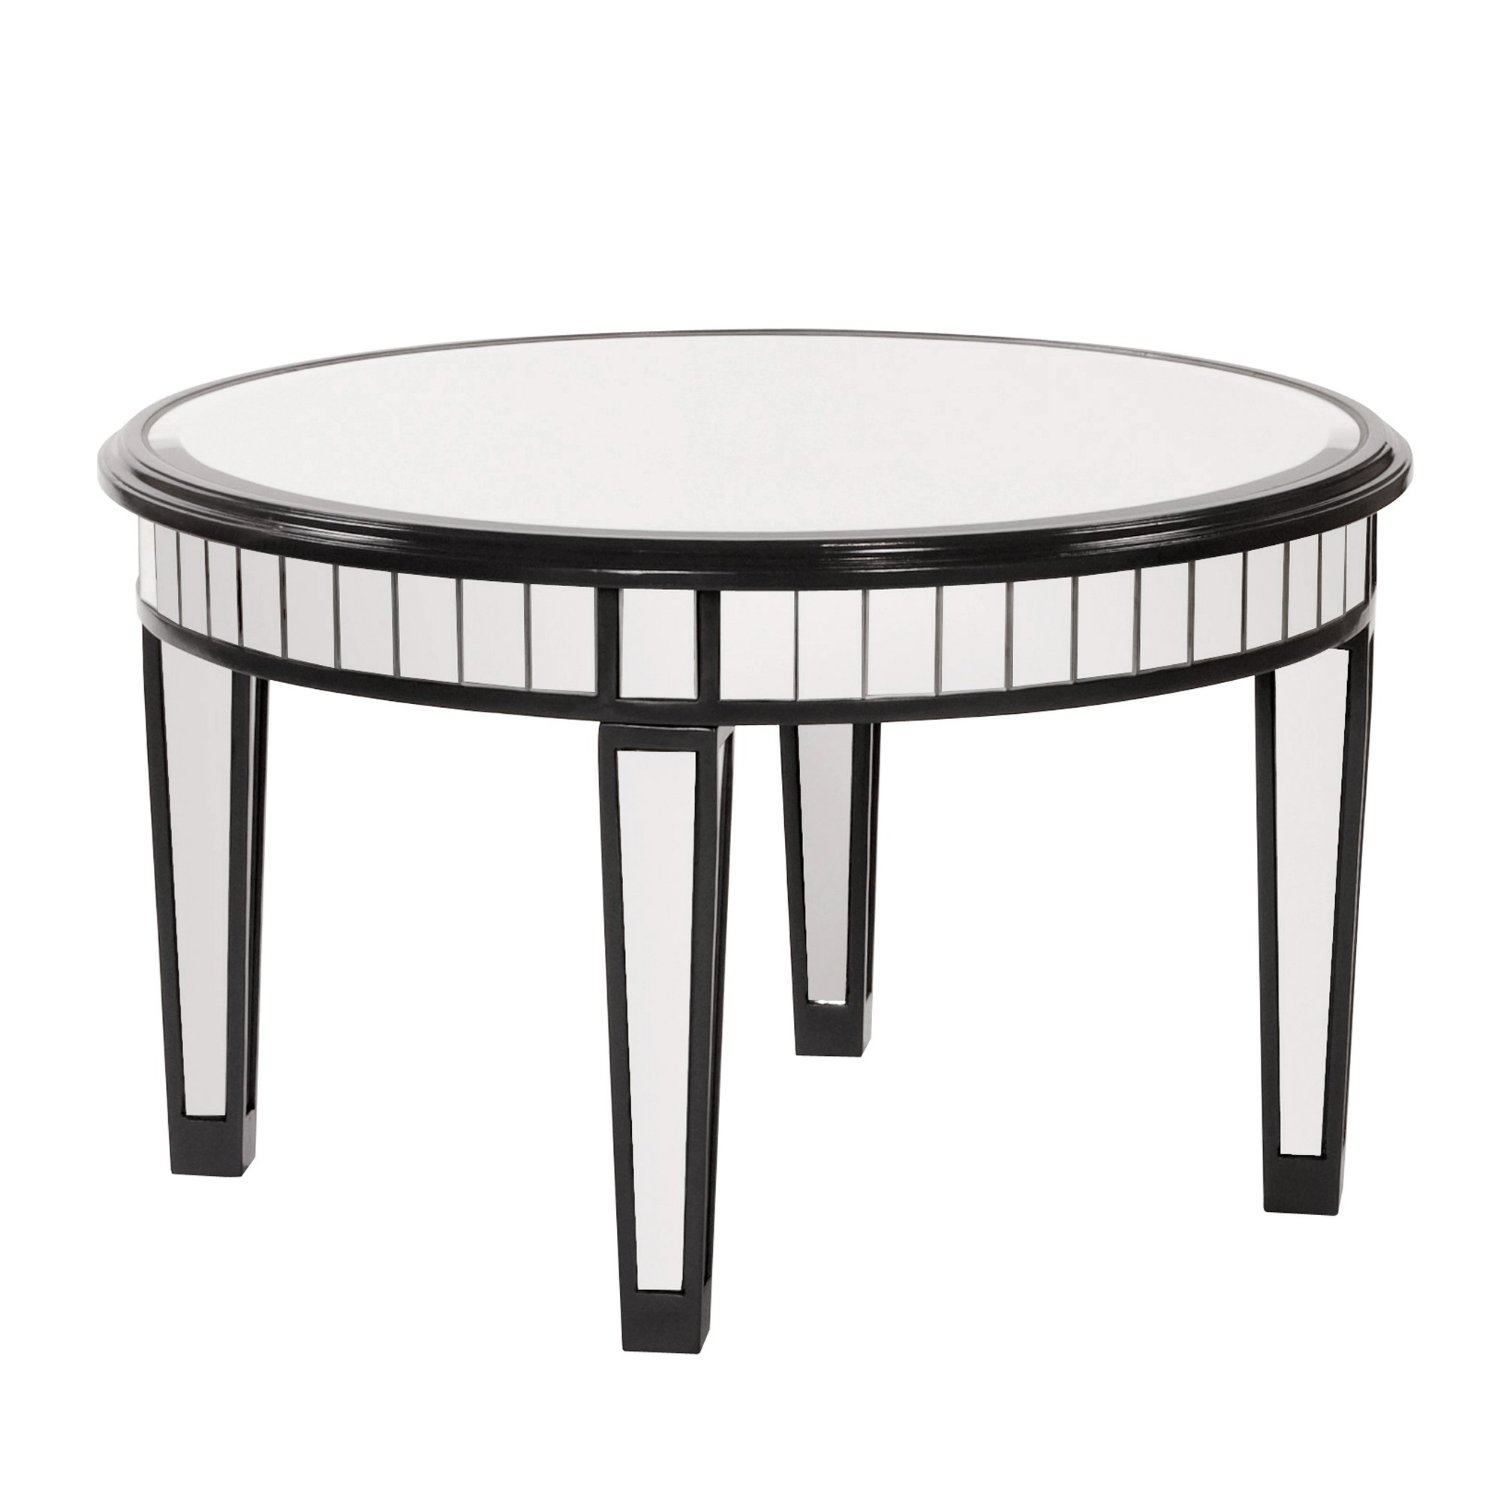 charming black round end table target and dining topper base metal glass top pedestal adorable plastic placemats coasters woven circle white chairs tablecloths small high